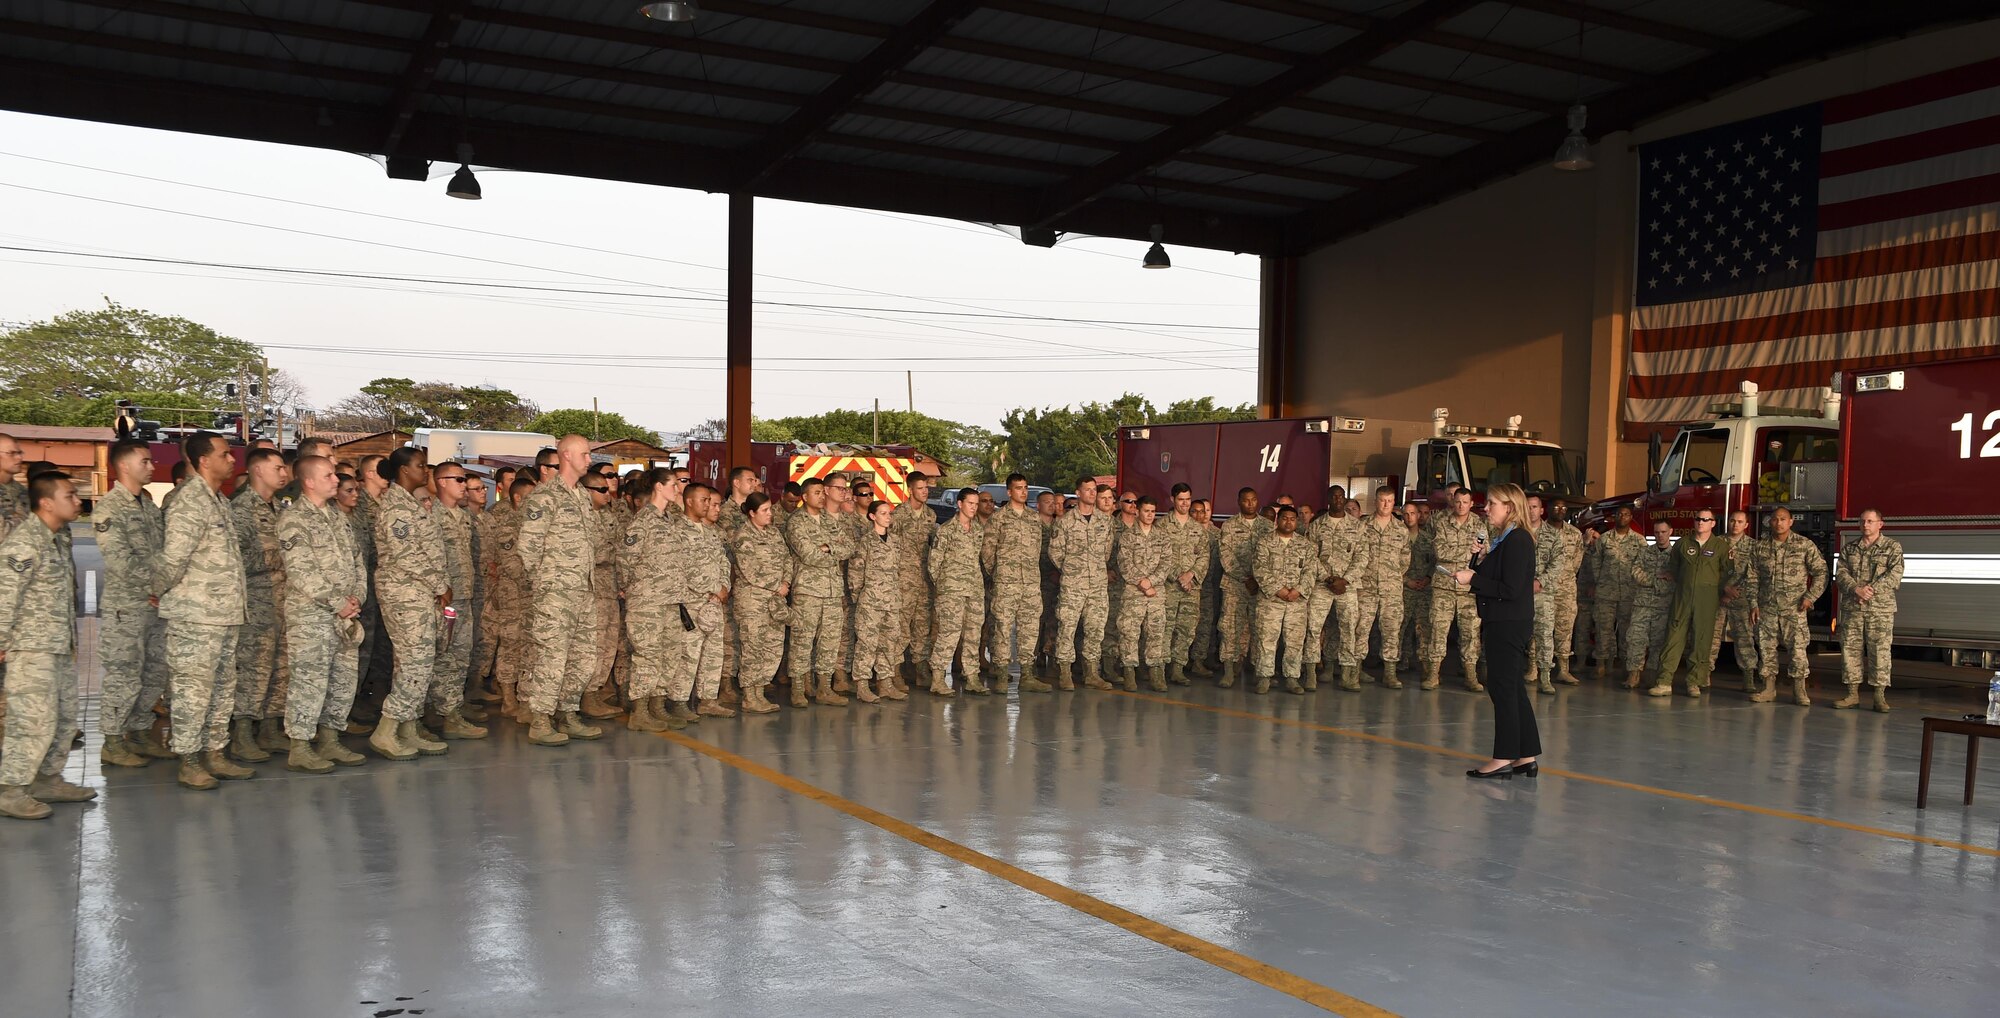 Air Force Secretary Deborah Lee James talks to Airmen stationed at Soto Cano Air Base, Honduras, April 8, 2016, during a town hall meeting. During the discussion, James highlighted that even though the bulk of Defense Department attention and resources are dedicated elsewhere, the Airmen supporting U.S. Southern Command still make available resources go a long way toward helping the U.S. and partner nations in the region. (U.S. Army photo/Martin Chahin)